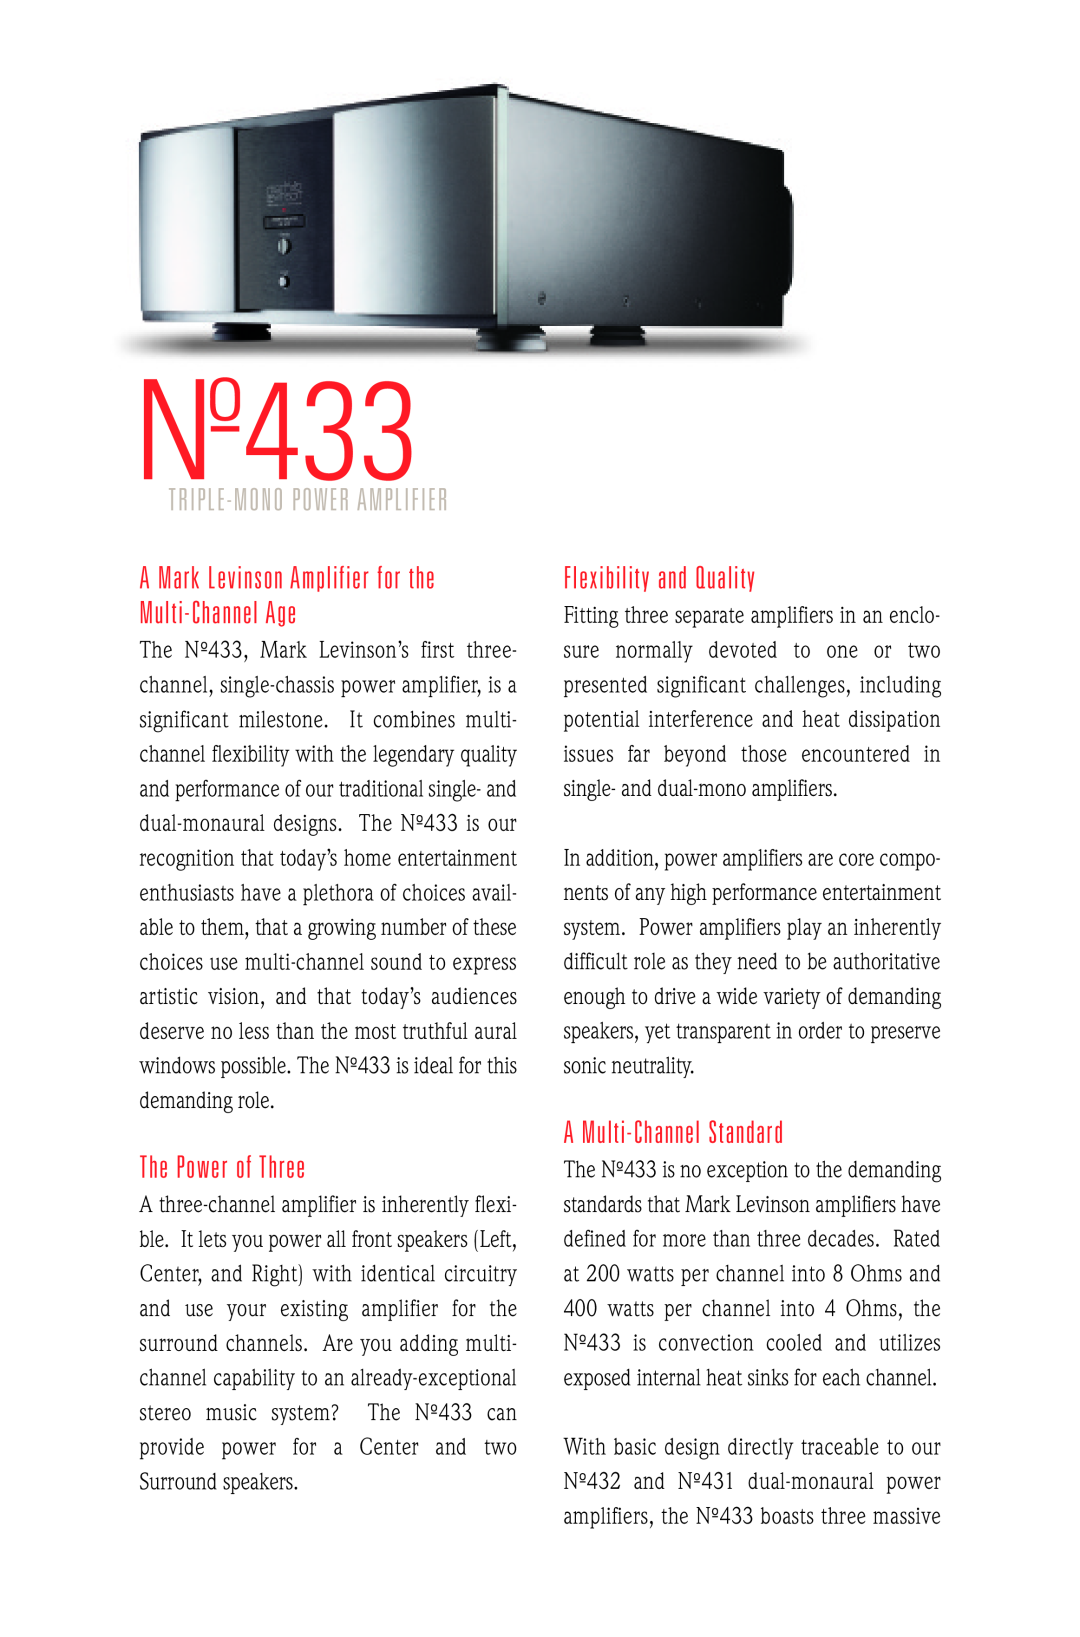 Mark Levinson N433 manual The Power of Three, Flexibility and Quality, A Multi - Channel Standard, Nº433 